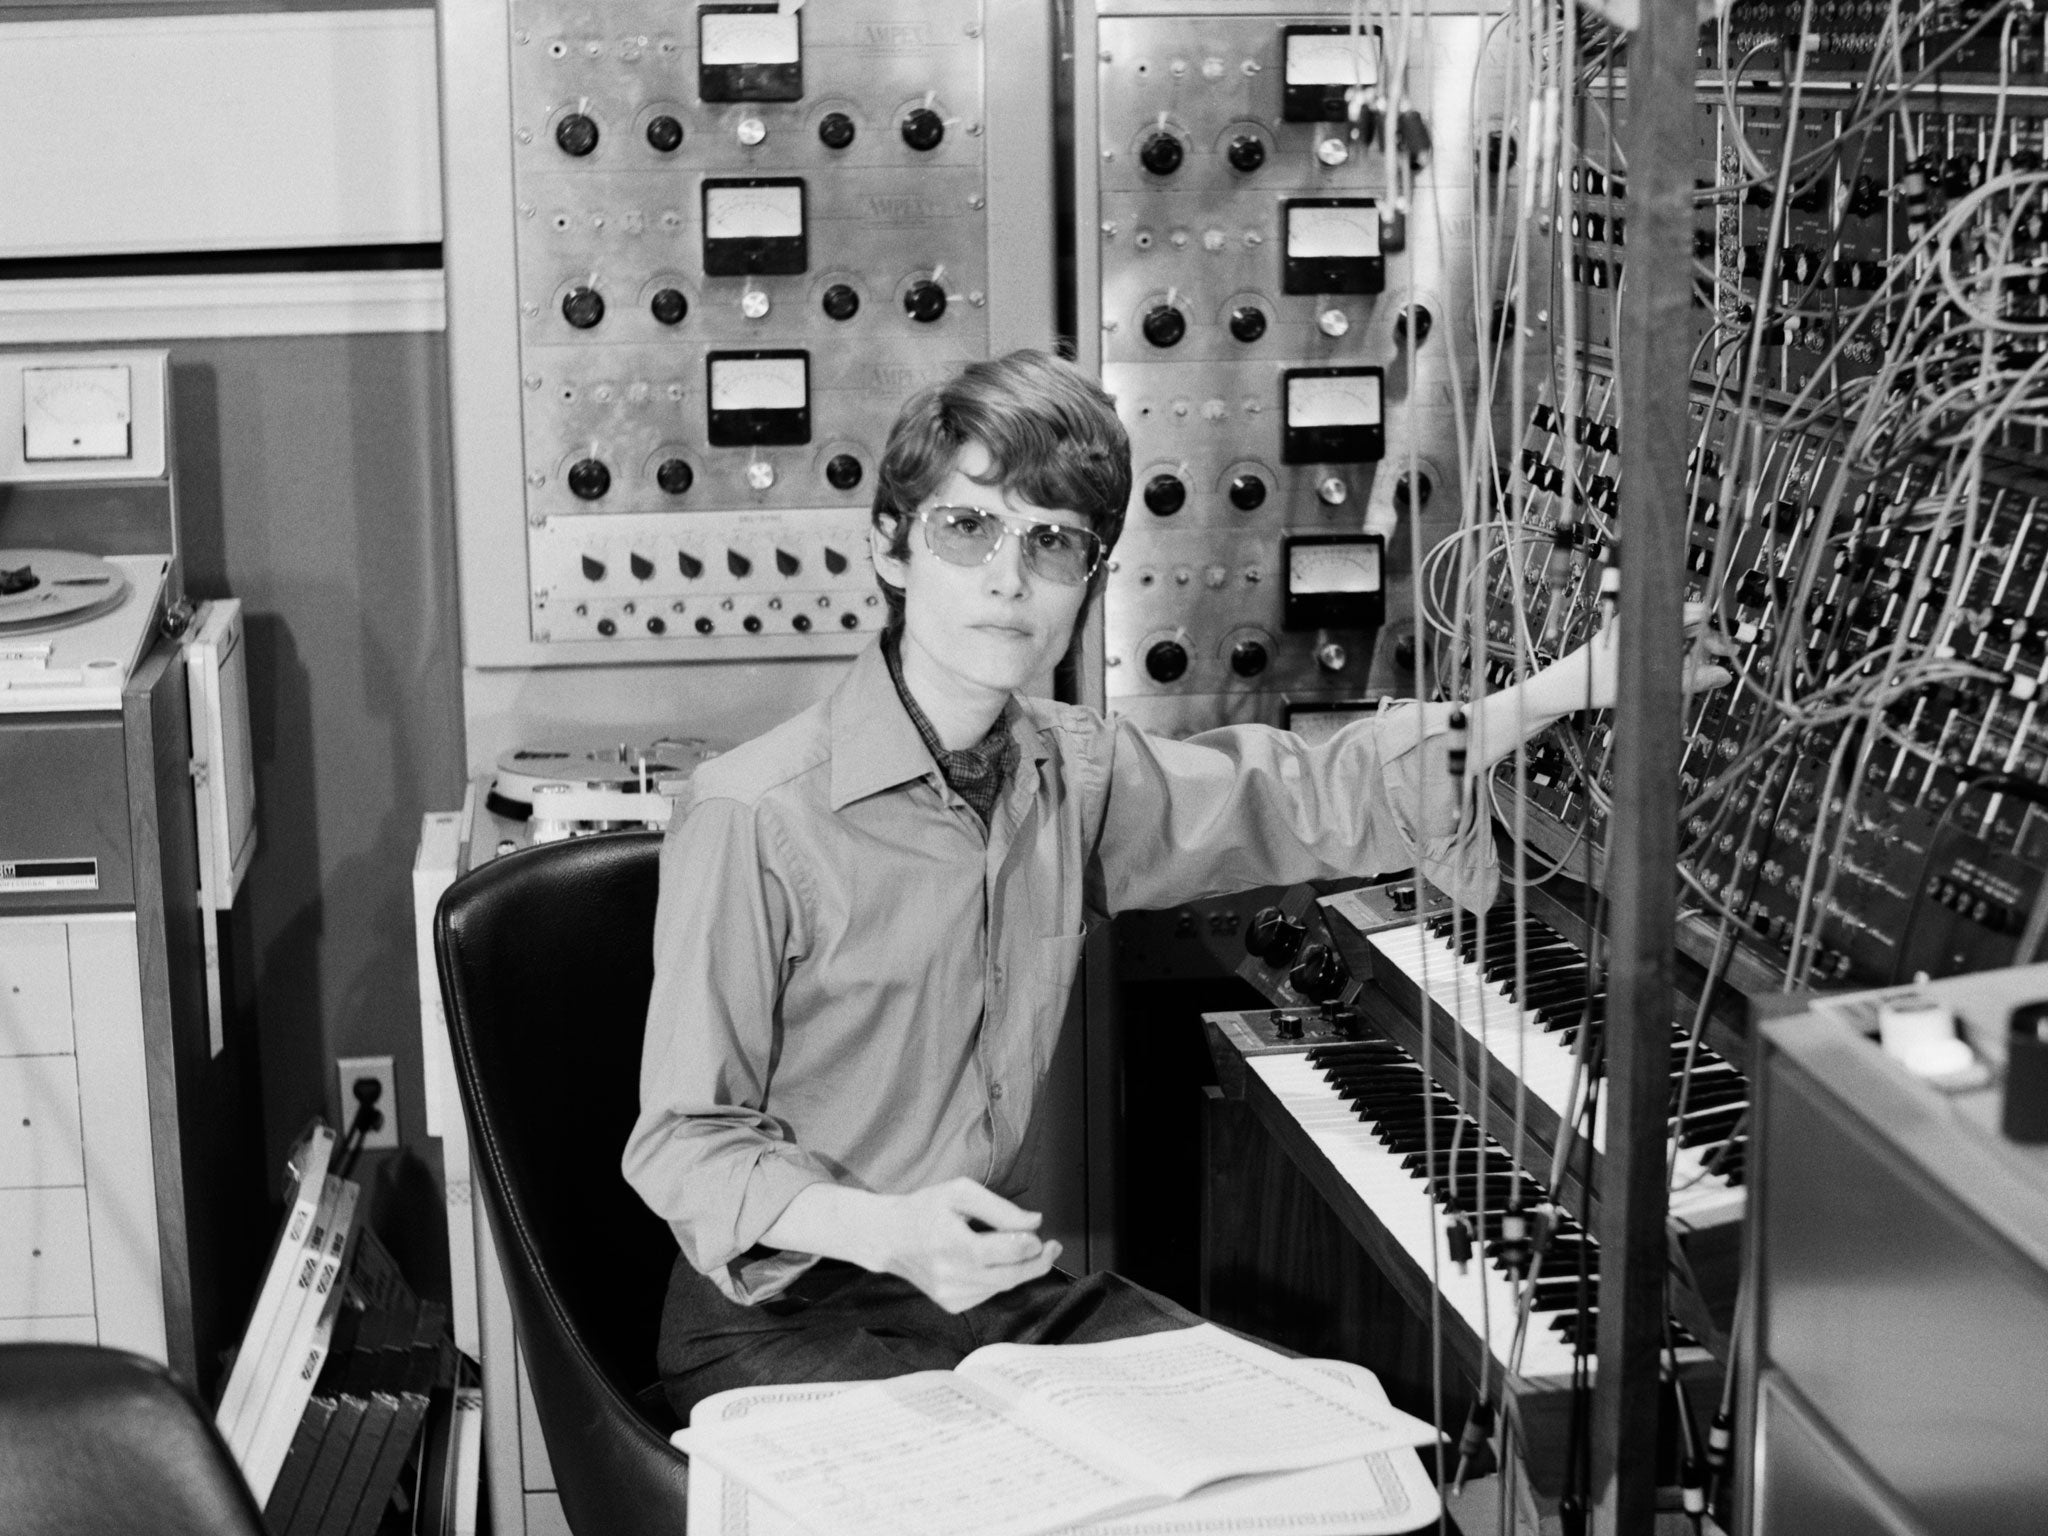 Carlos in 1972 at a keyboard and synthesiser she built